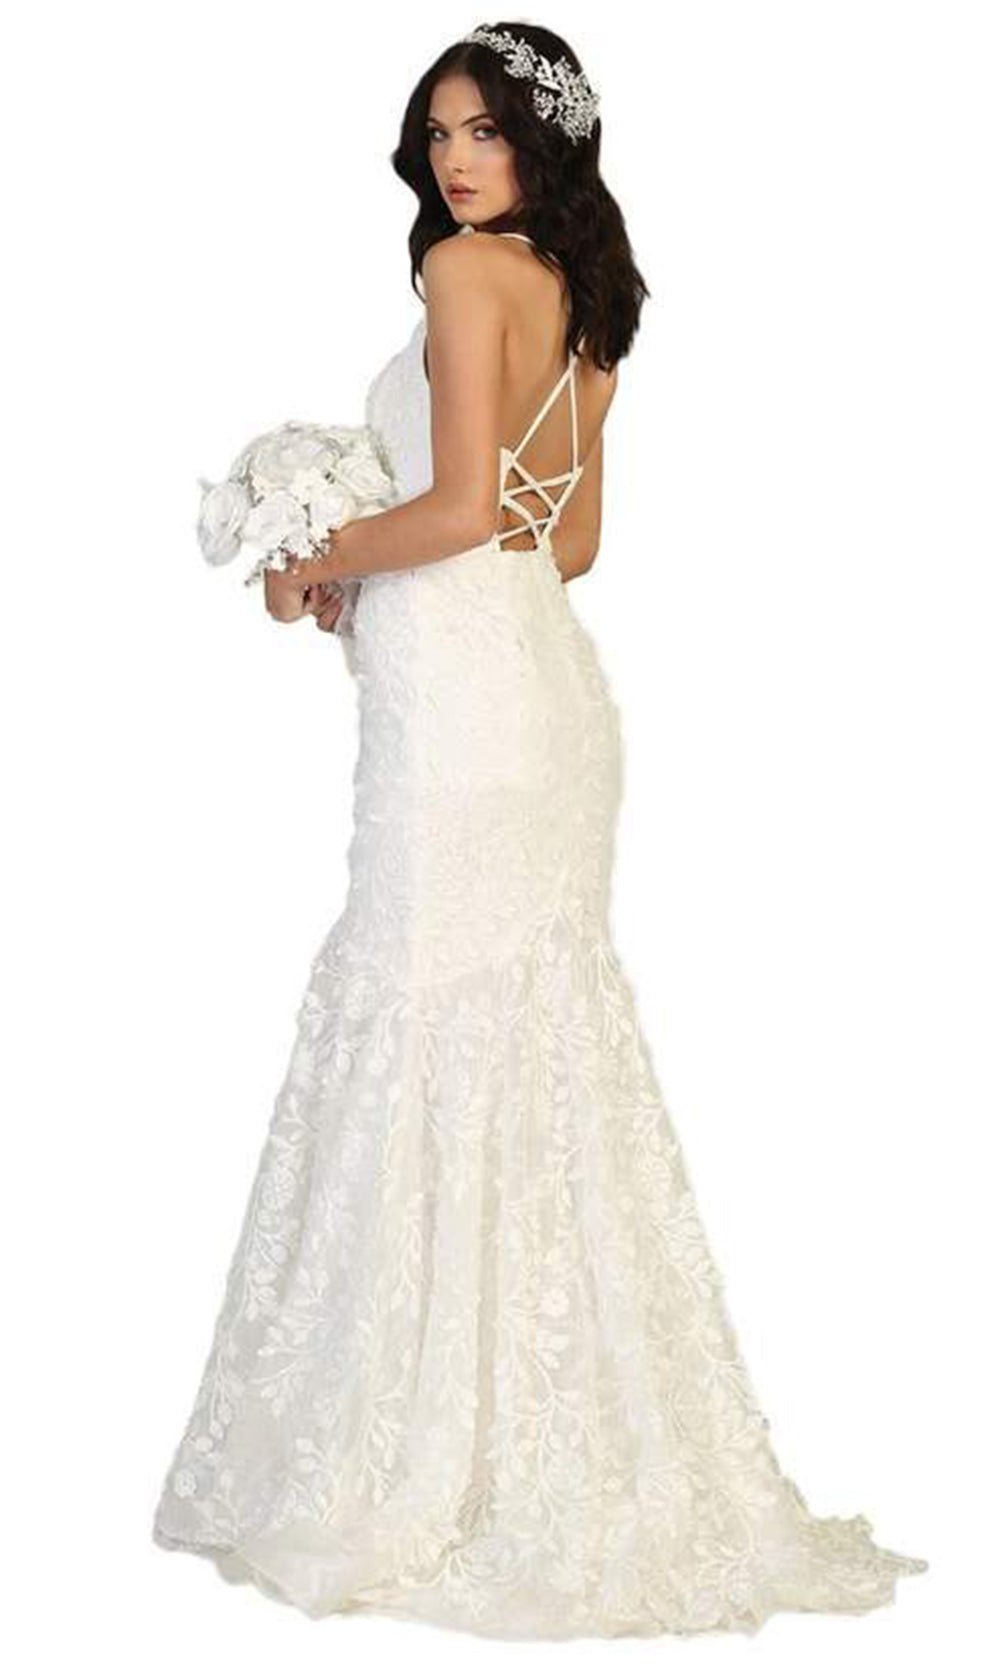 May Queen - Embroidered Applique Trumpet Dress In White